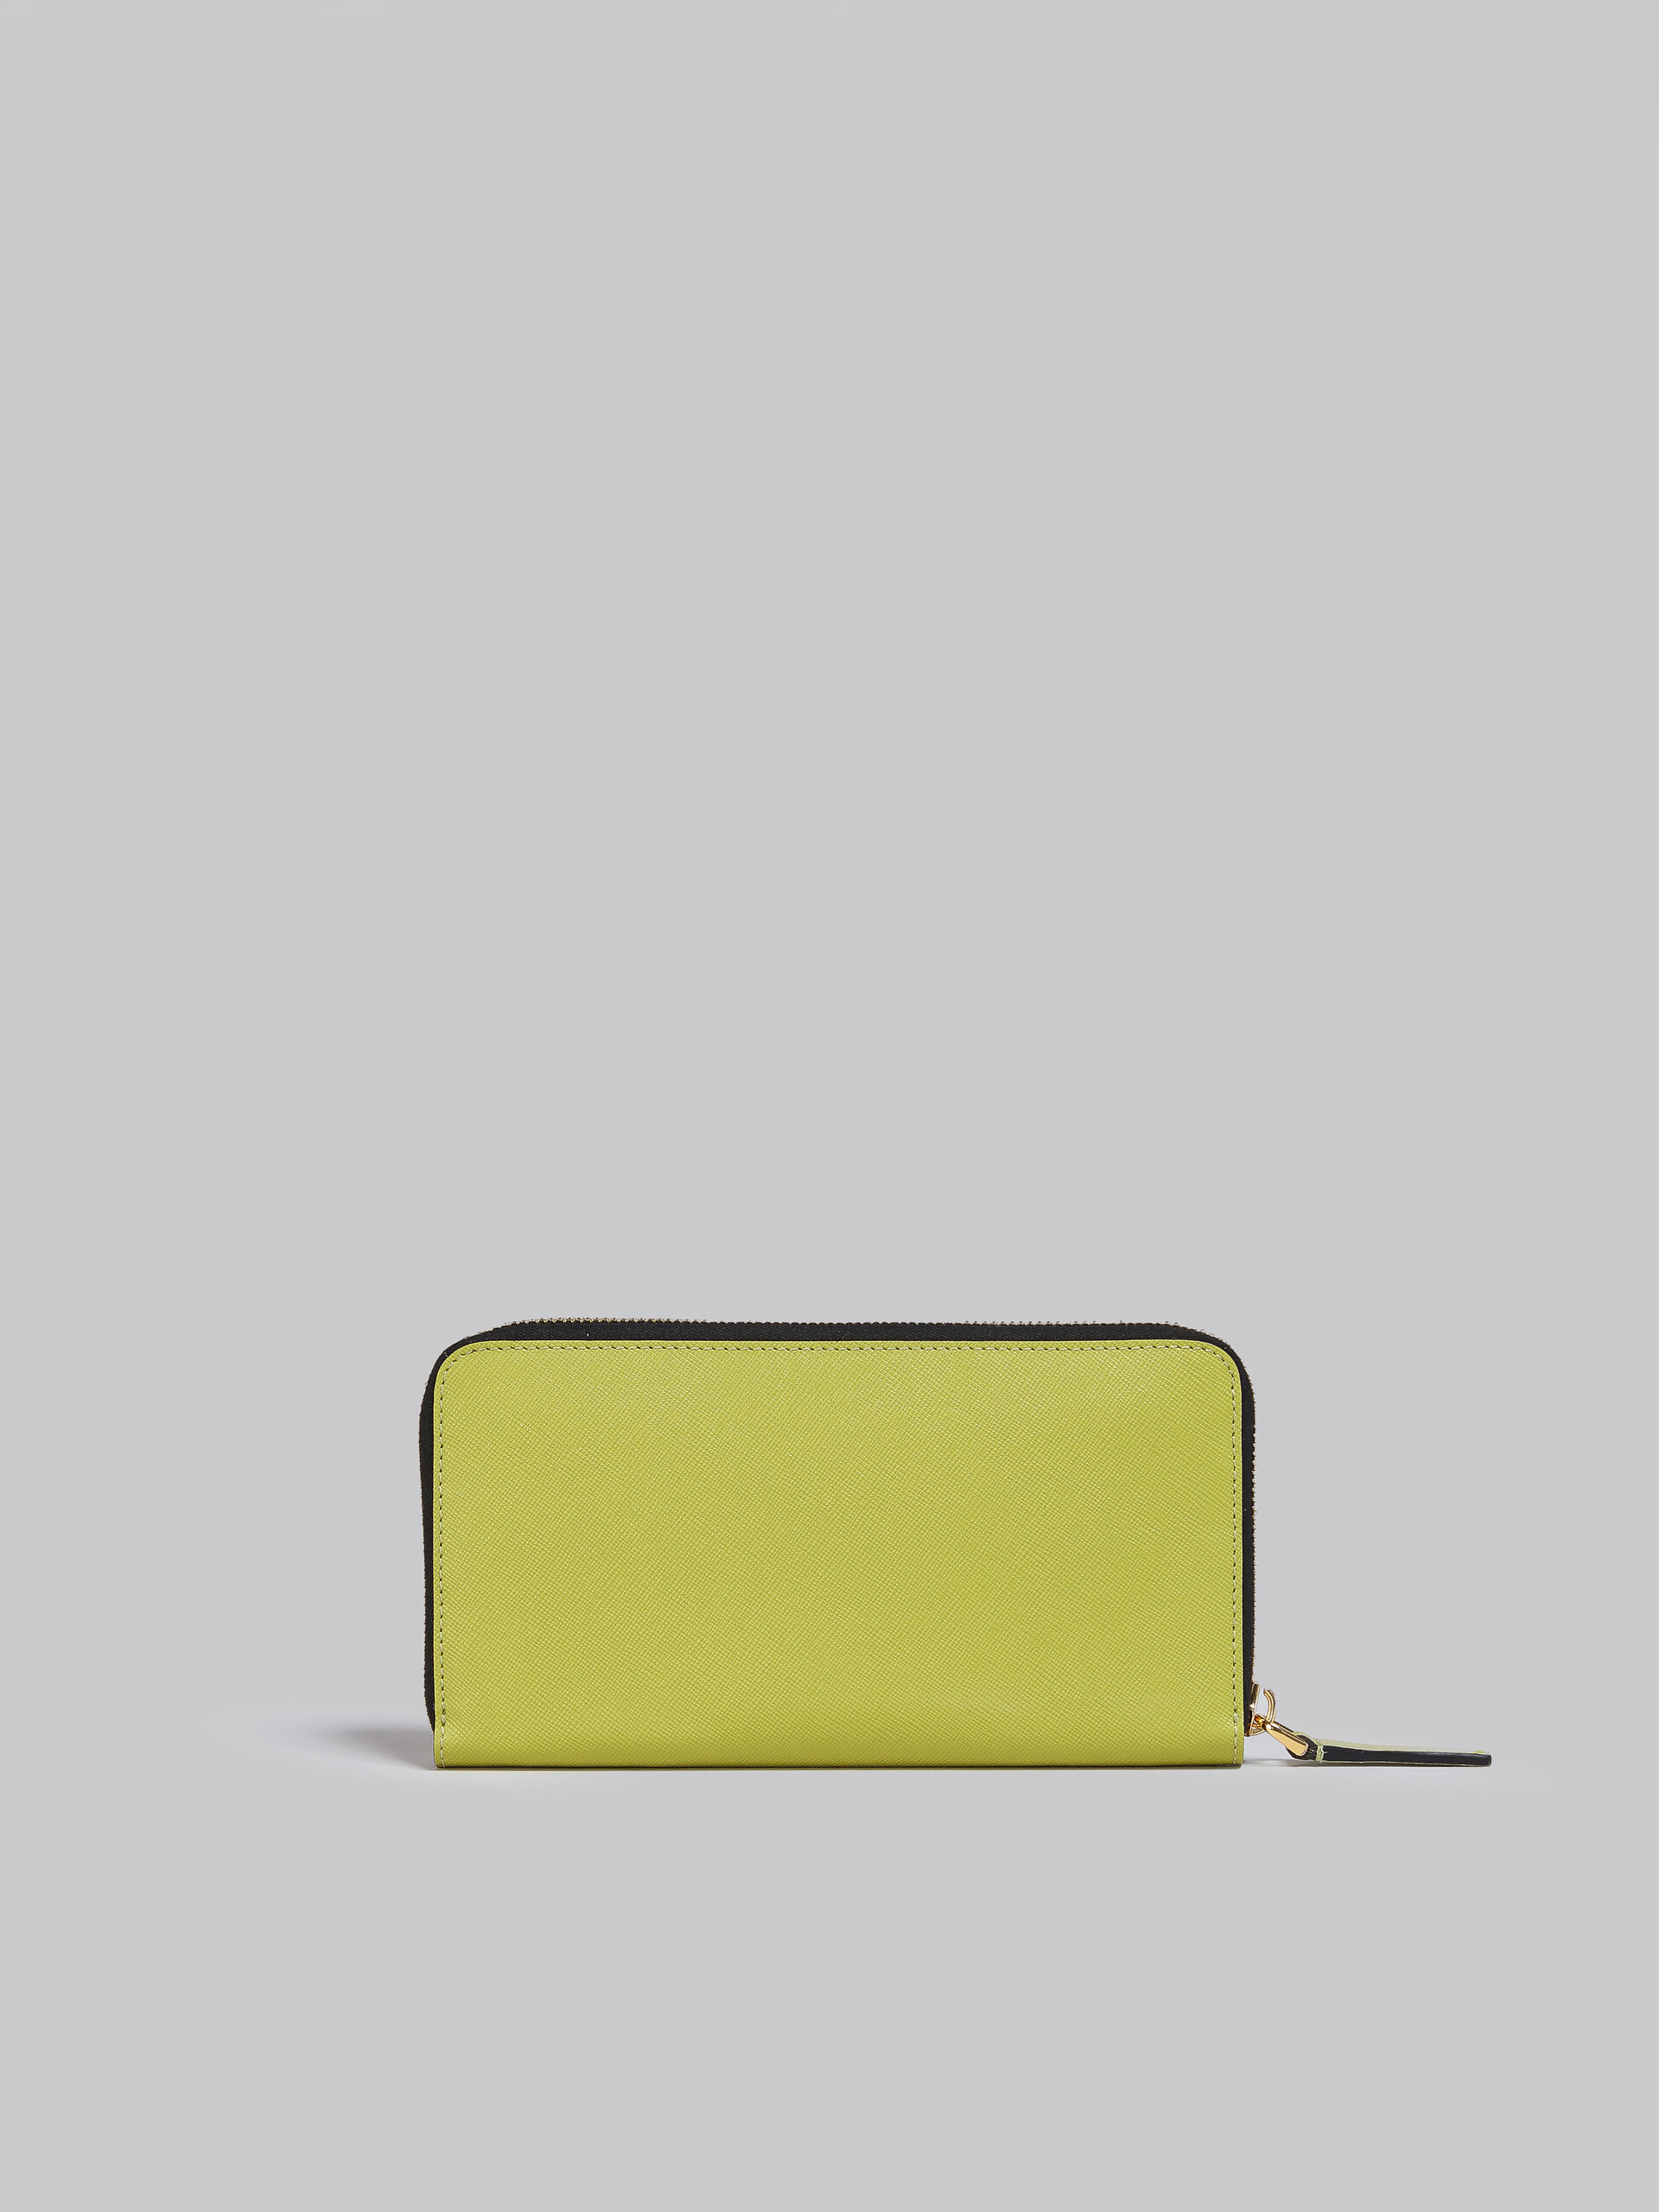 Multicoloured green saffiano leather zip-around wallet - Wallets - Image 3